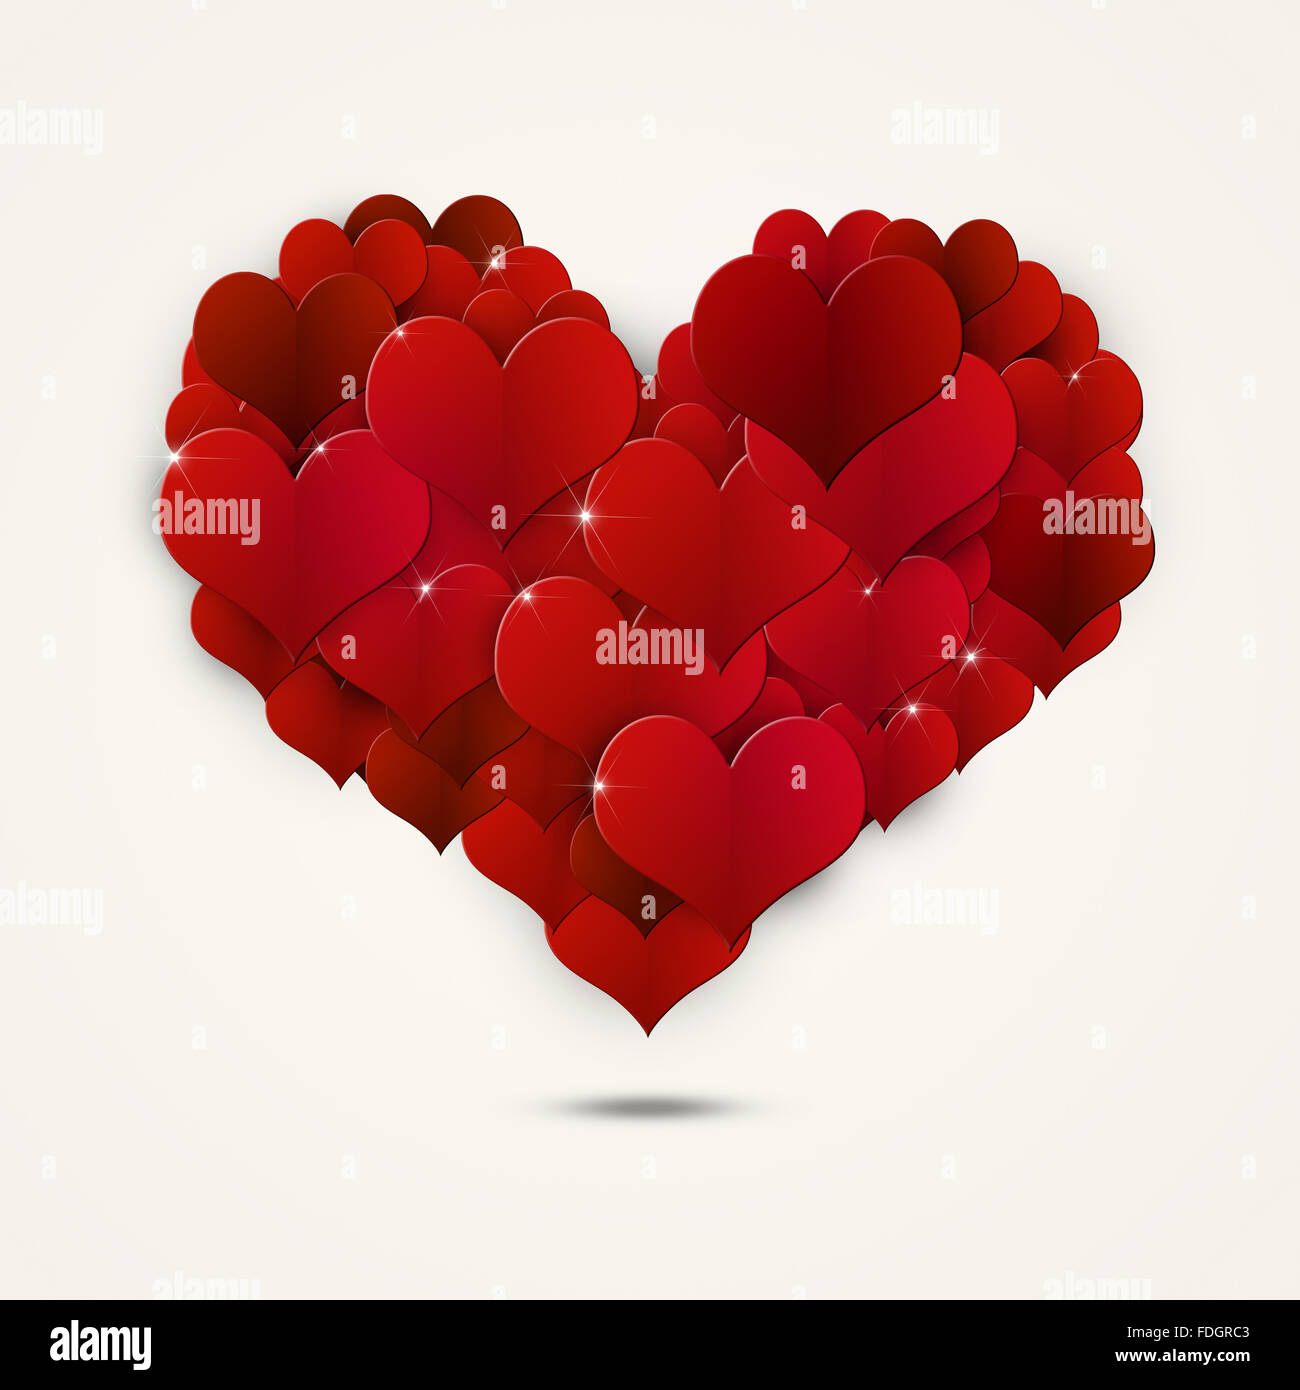 holiday valentine heart shape card with red hearts Stock Photo